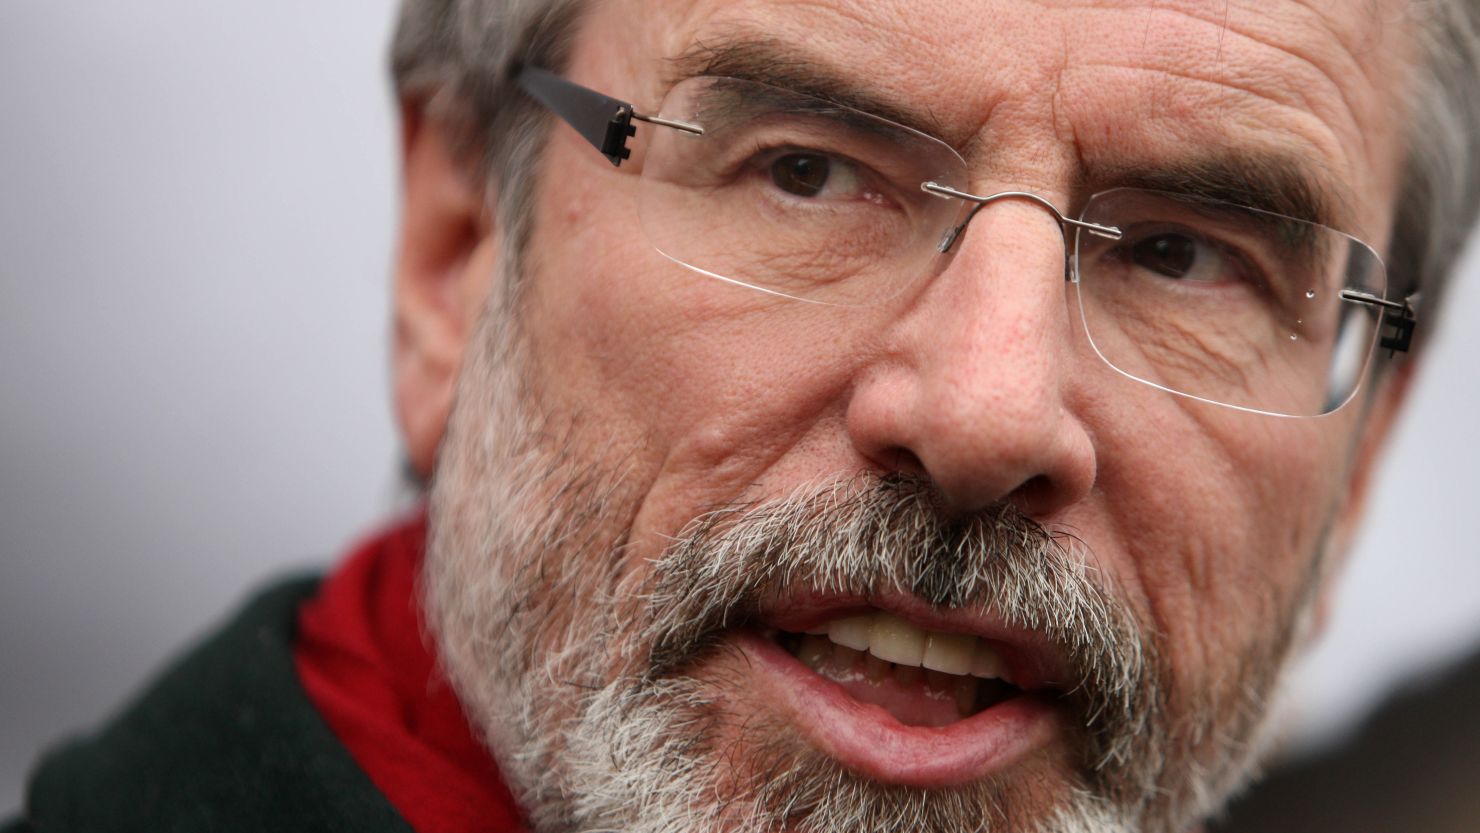 Gerry Adams said he was hopeful the conference would "mark a step change in the process for change" in the region